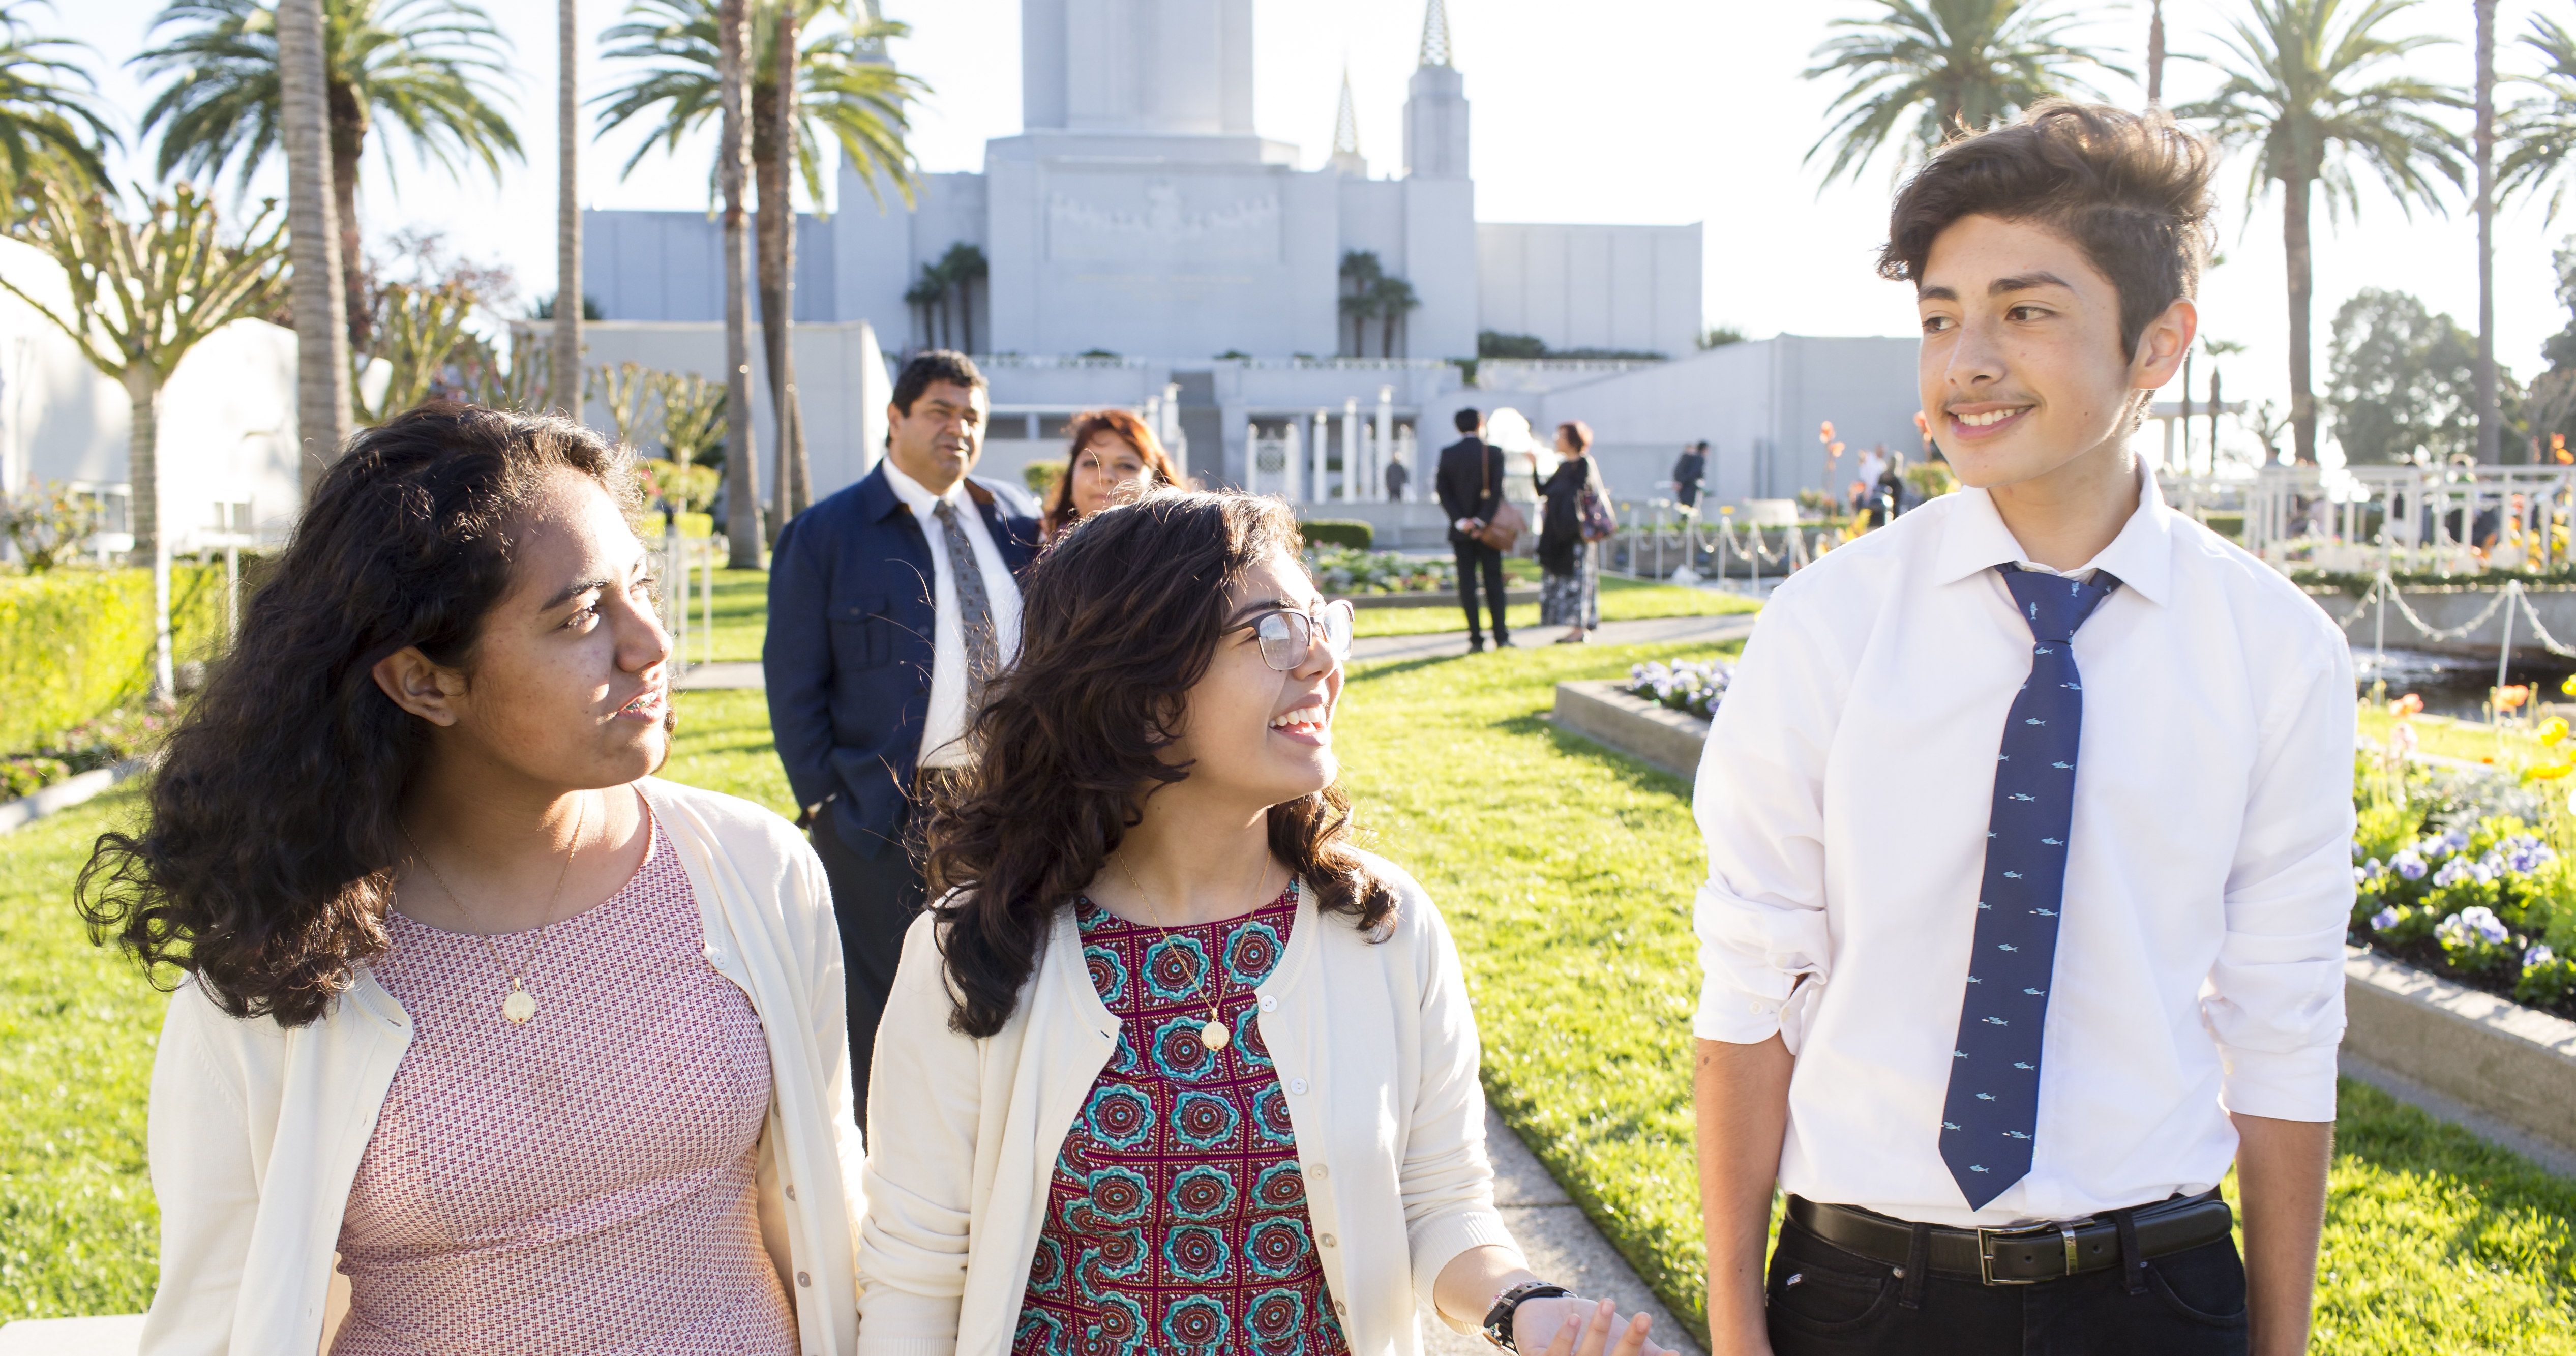 Two sisters interact with a young man while their parents watch them from behind.Photo taken on the grounds in front of the Oakland California Temple.